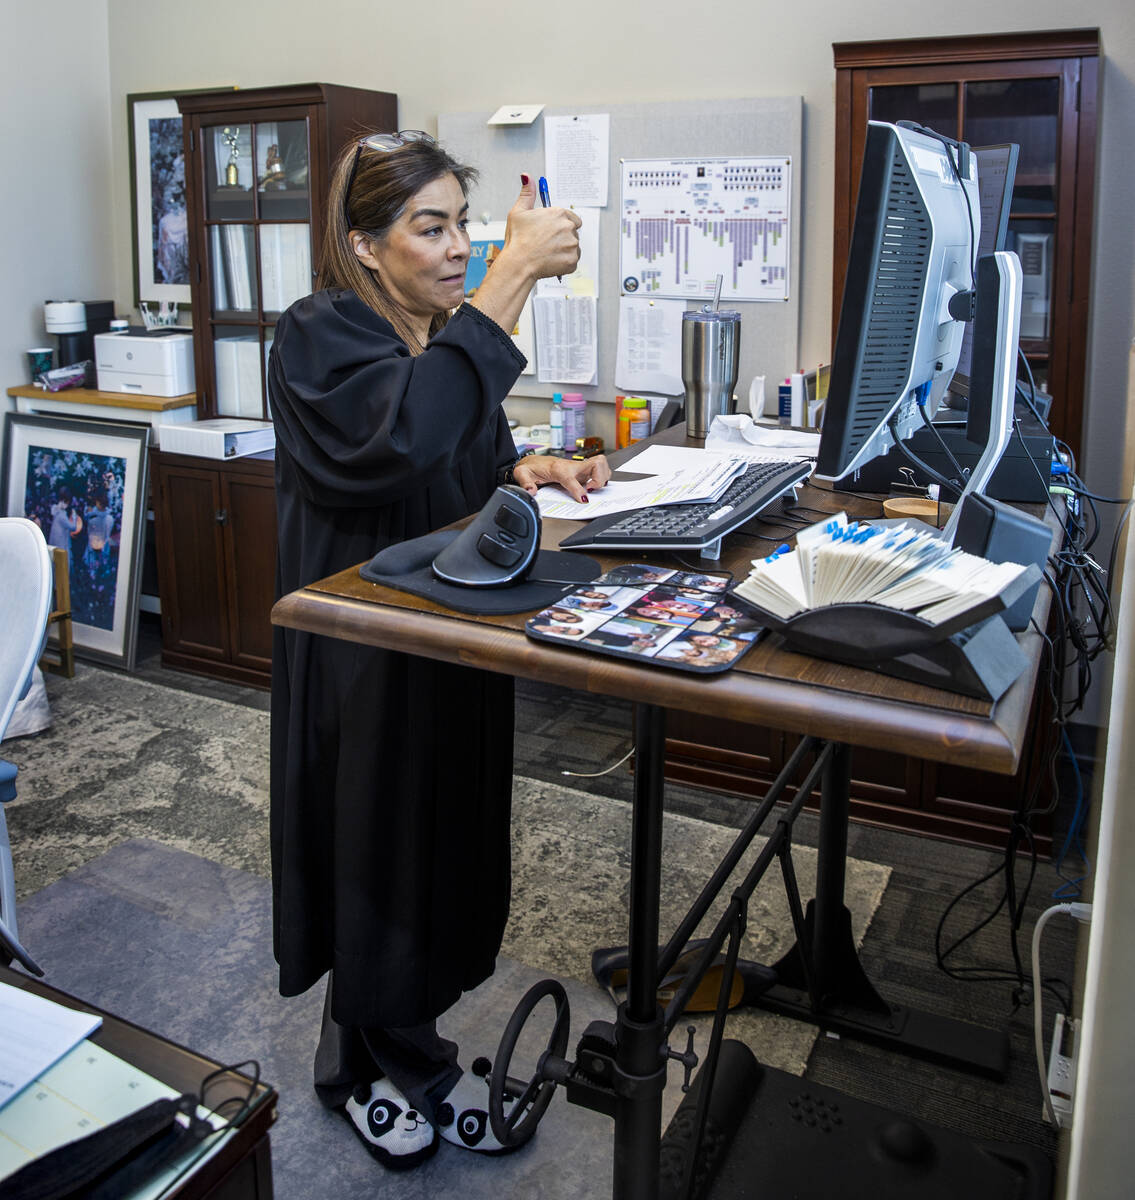 District Judge Bita Yeager conducts mental health court from her chambers at the Regional Justi ...